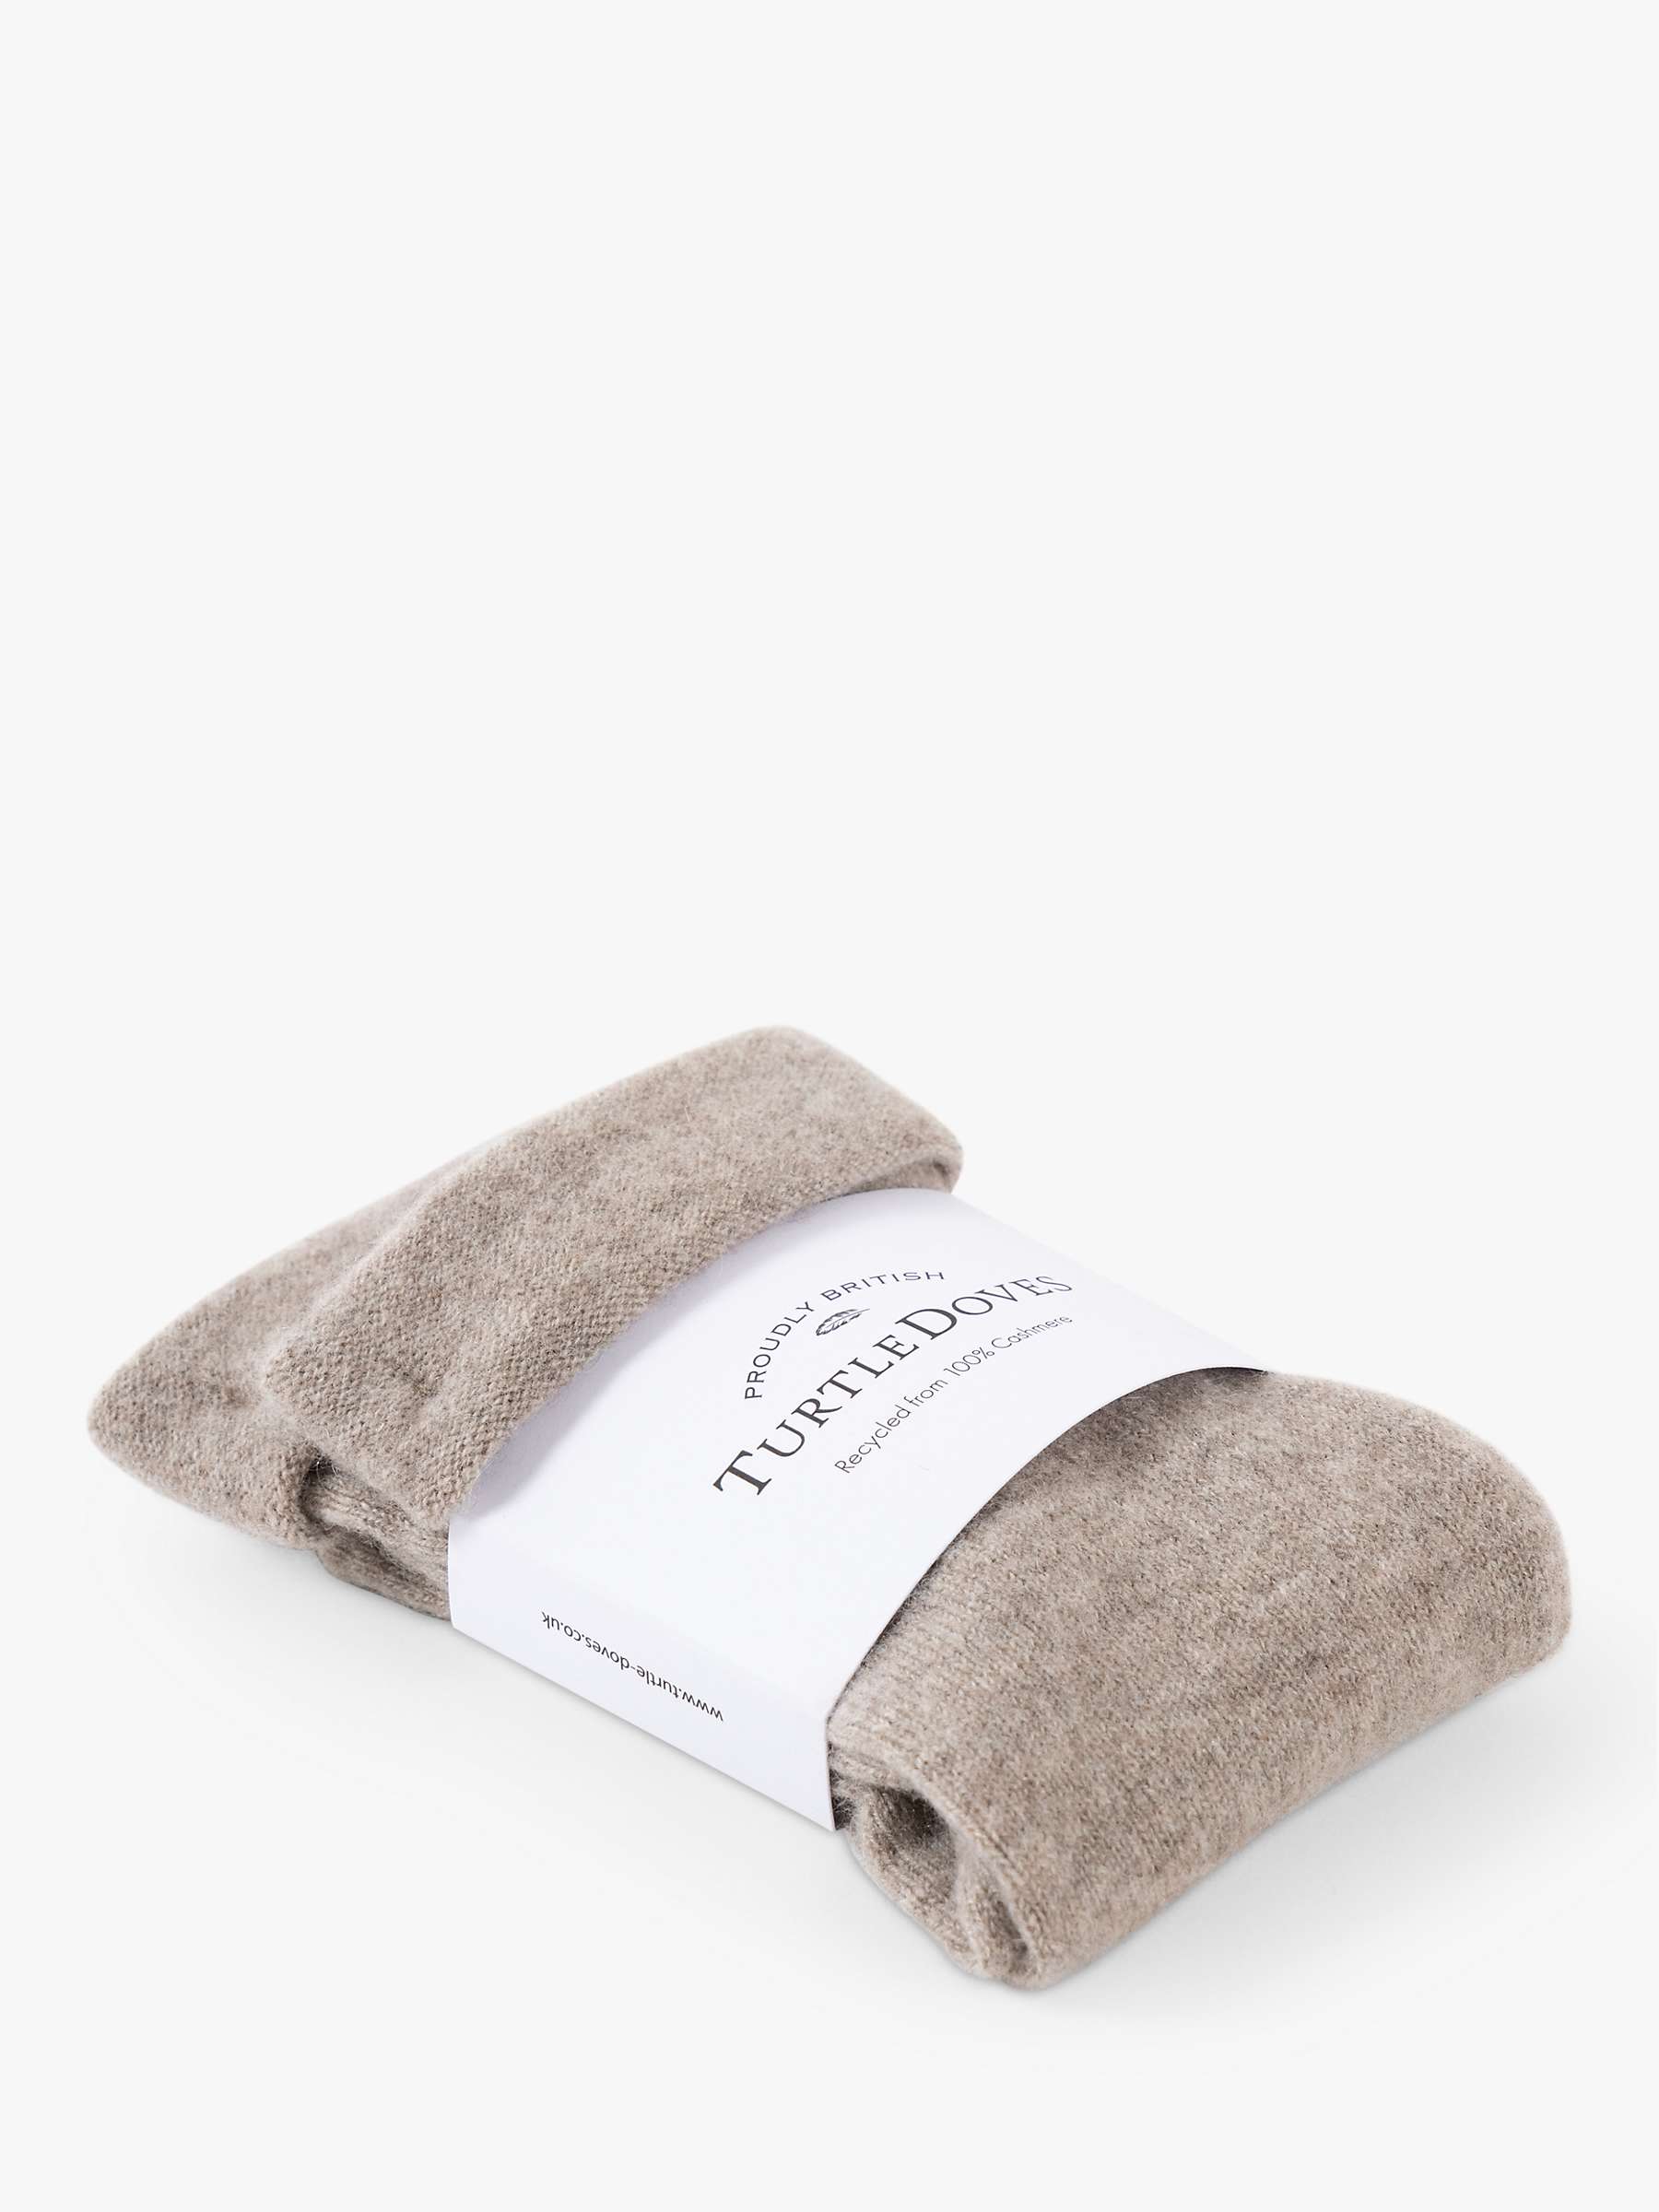 Buy Celtic & Co. x Turtle Doves Recycled Cashmere Fingerless Gloves Online at johnlewis.com